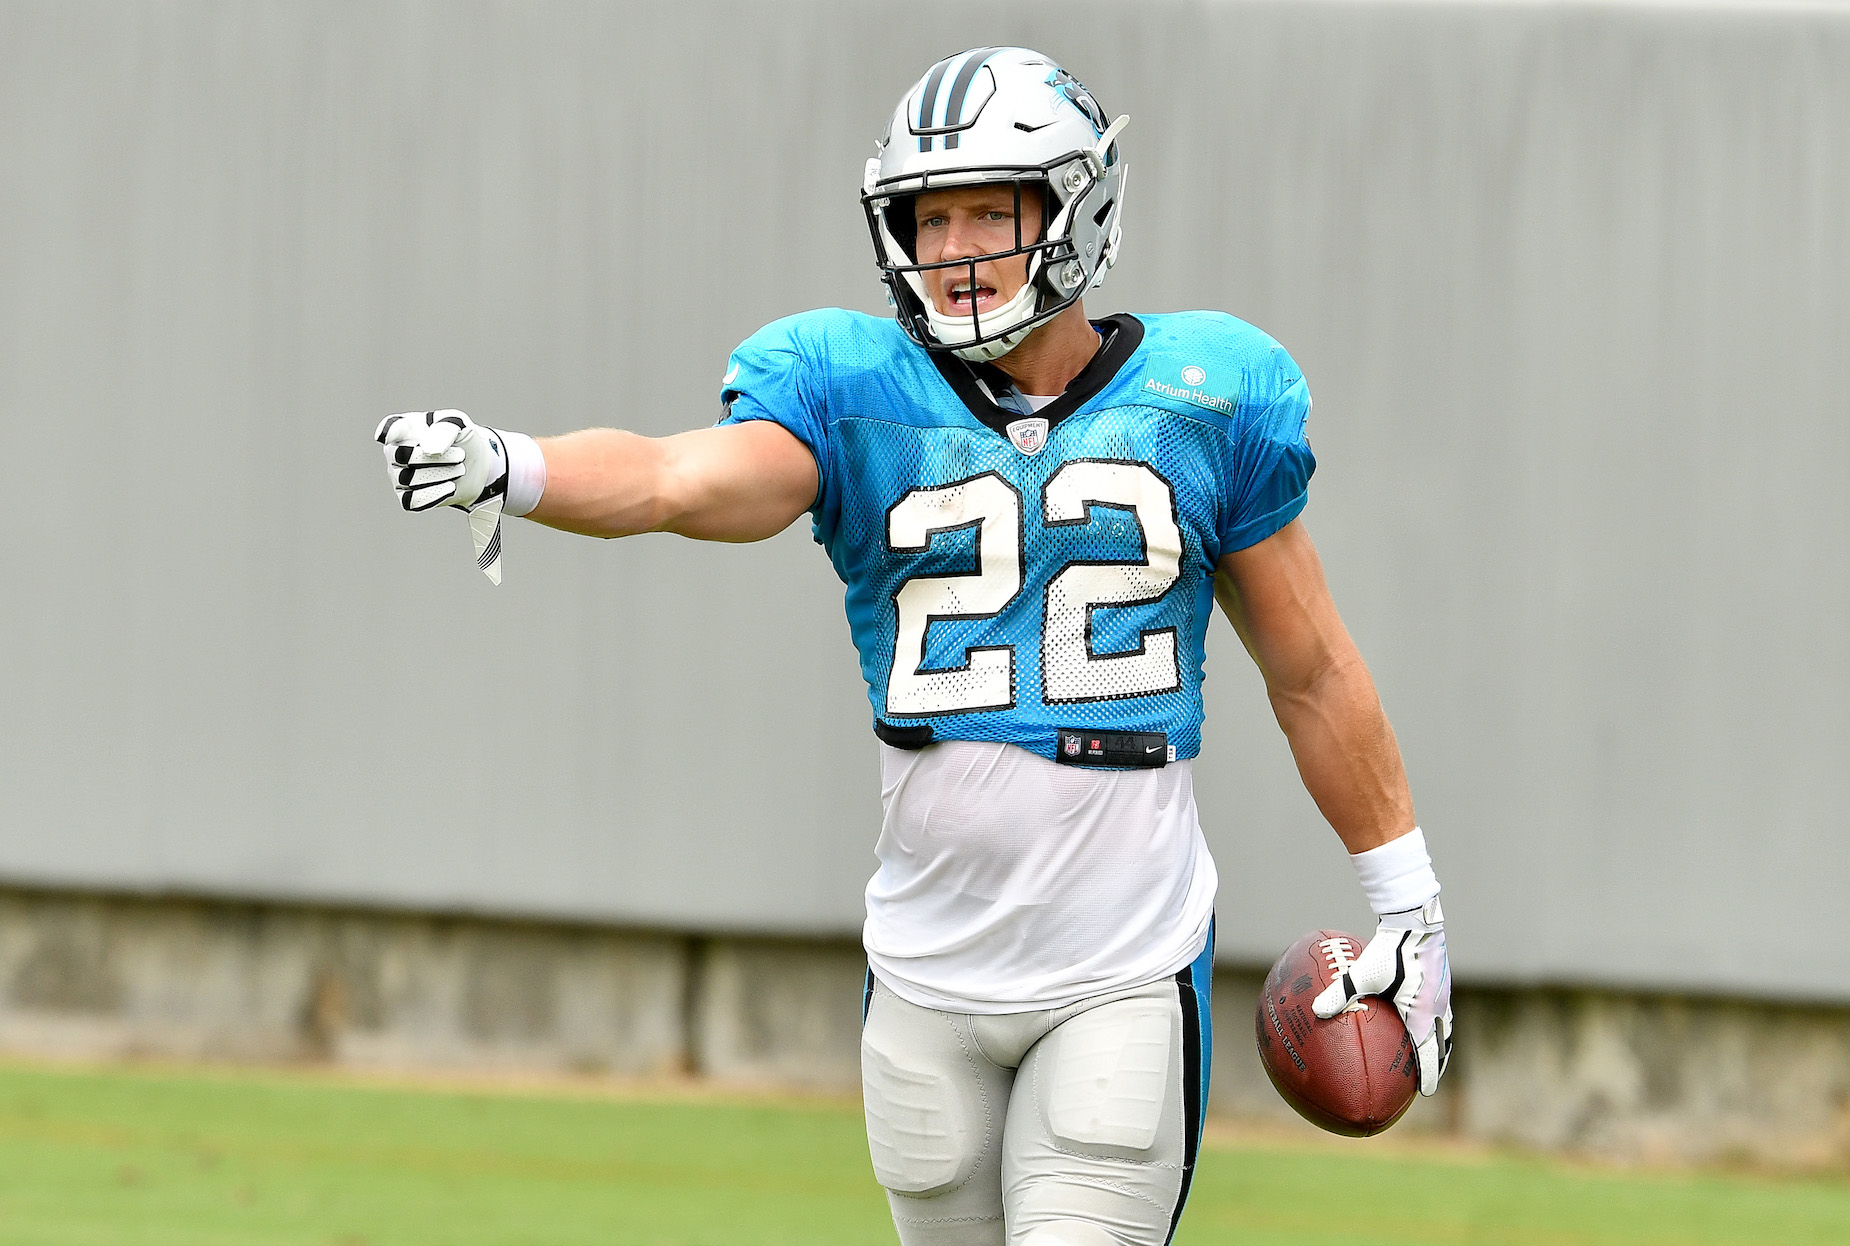 During his time in isolation, Panthers running back Christian McCaffrey came to love quarantine.